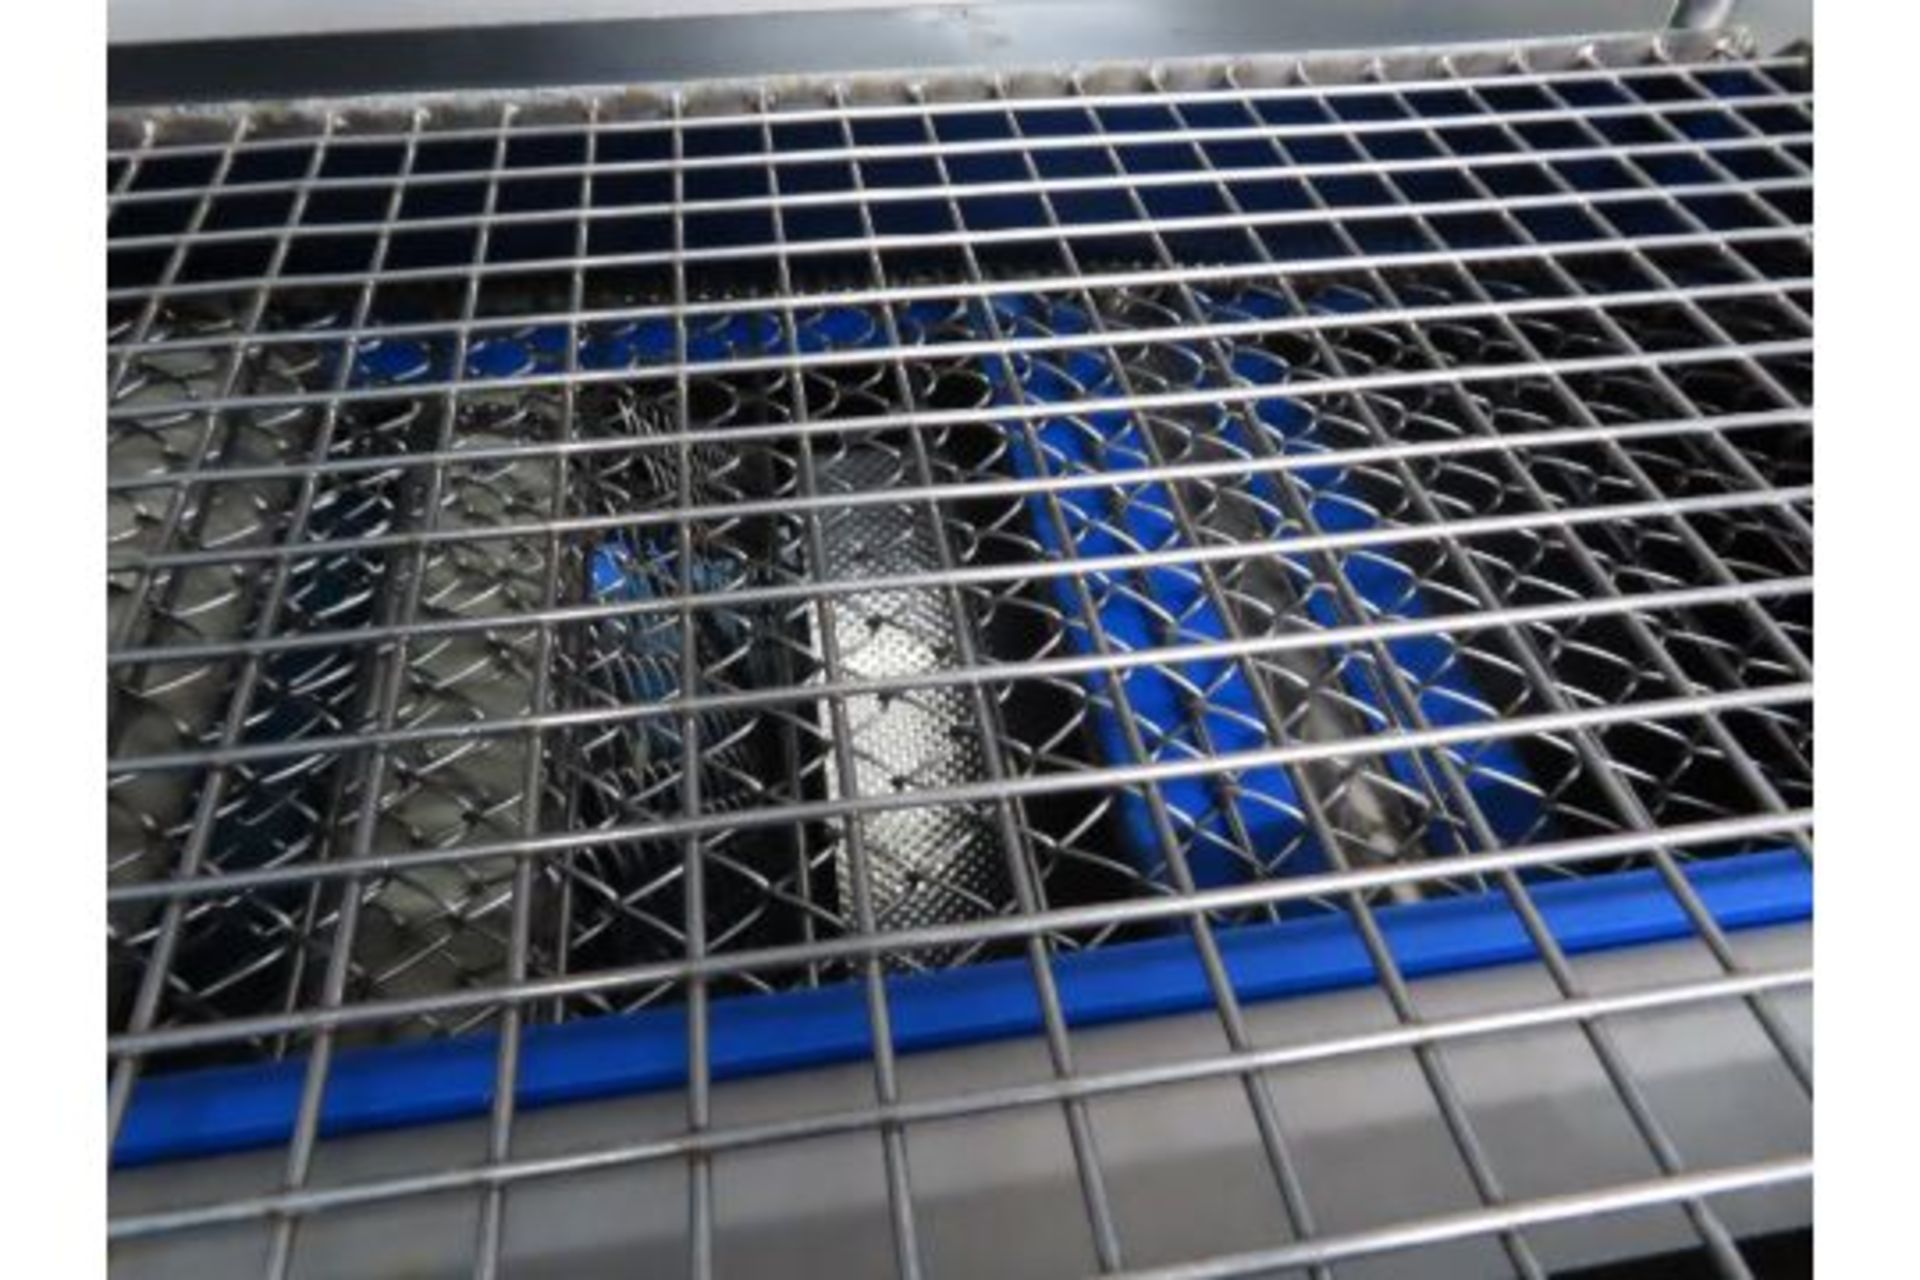 SIEVE SYSTEM. - Image 6 of 6